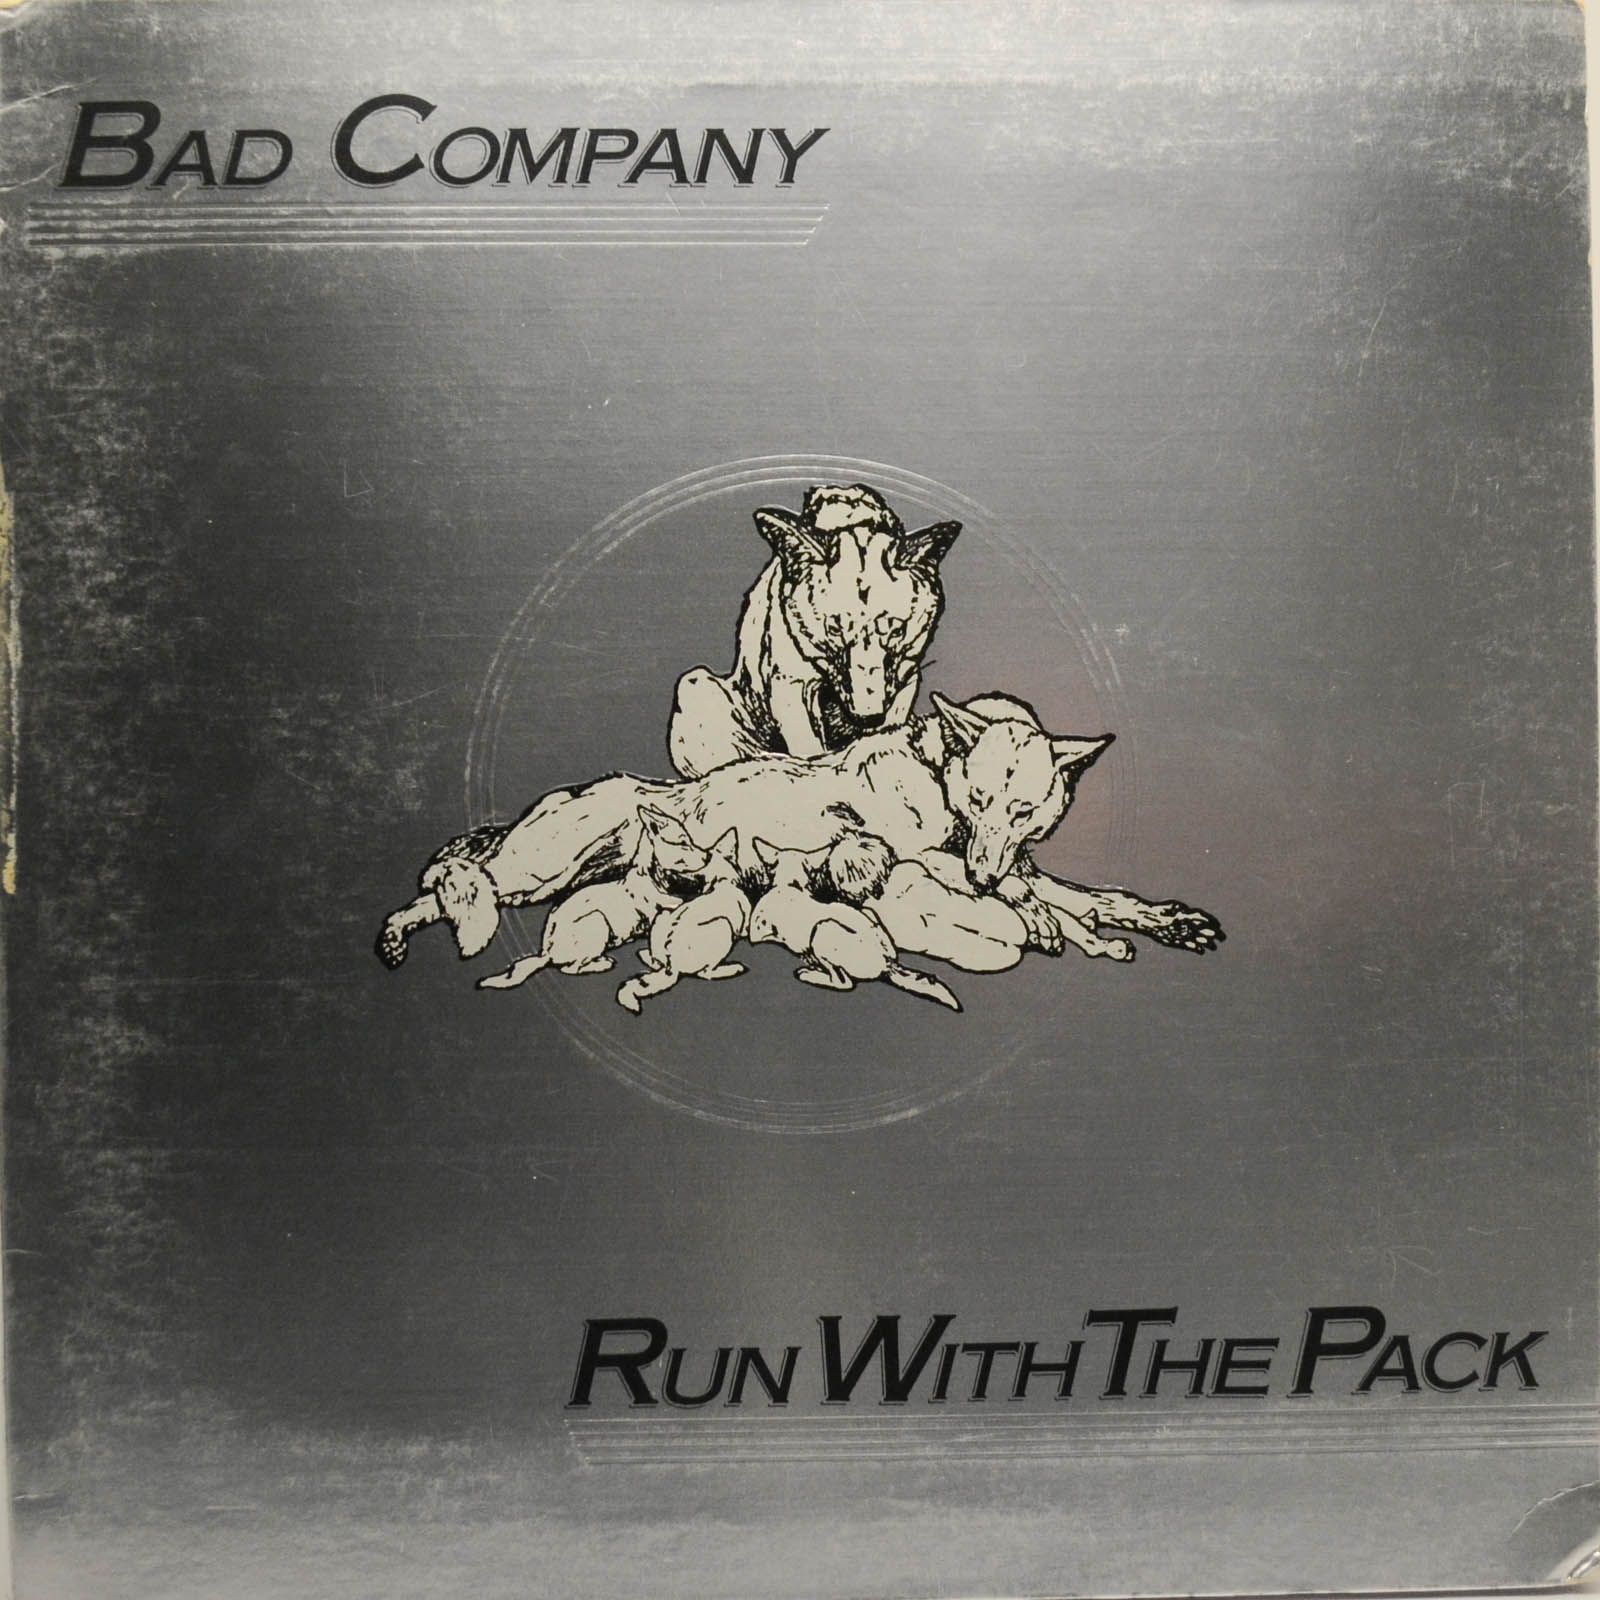 Bad Company — Run With The Pack, 1976